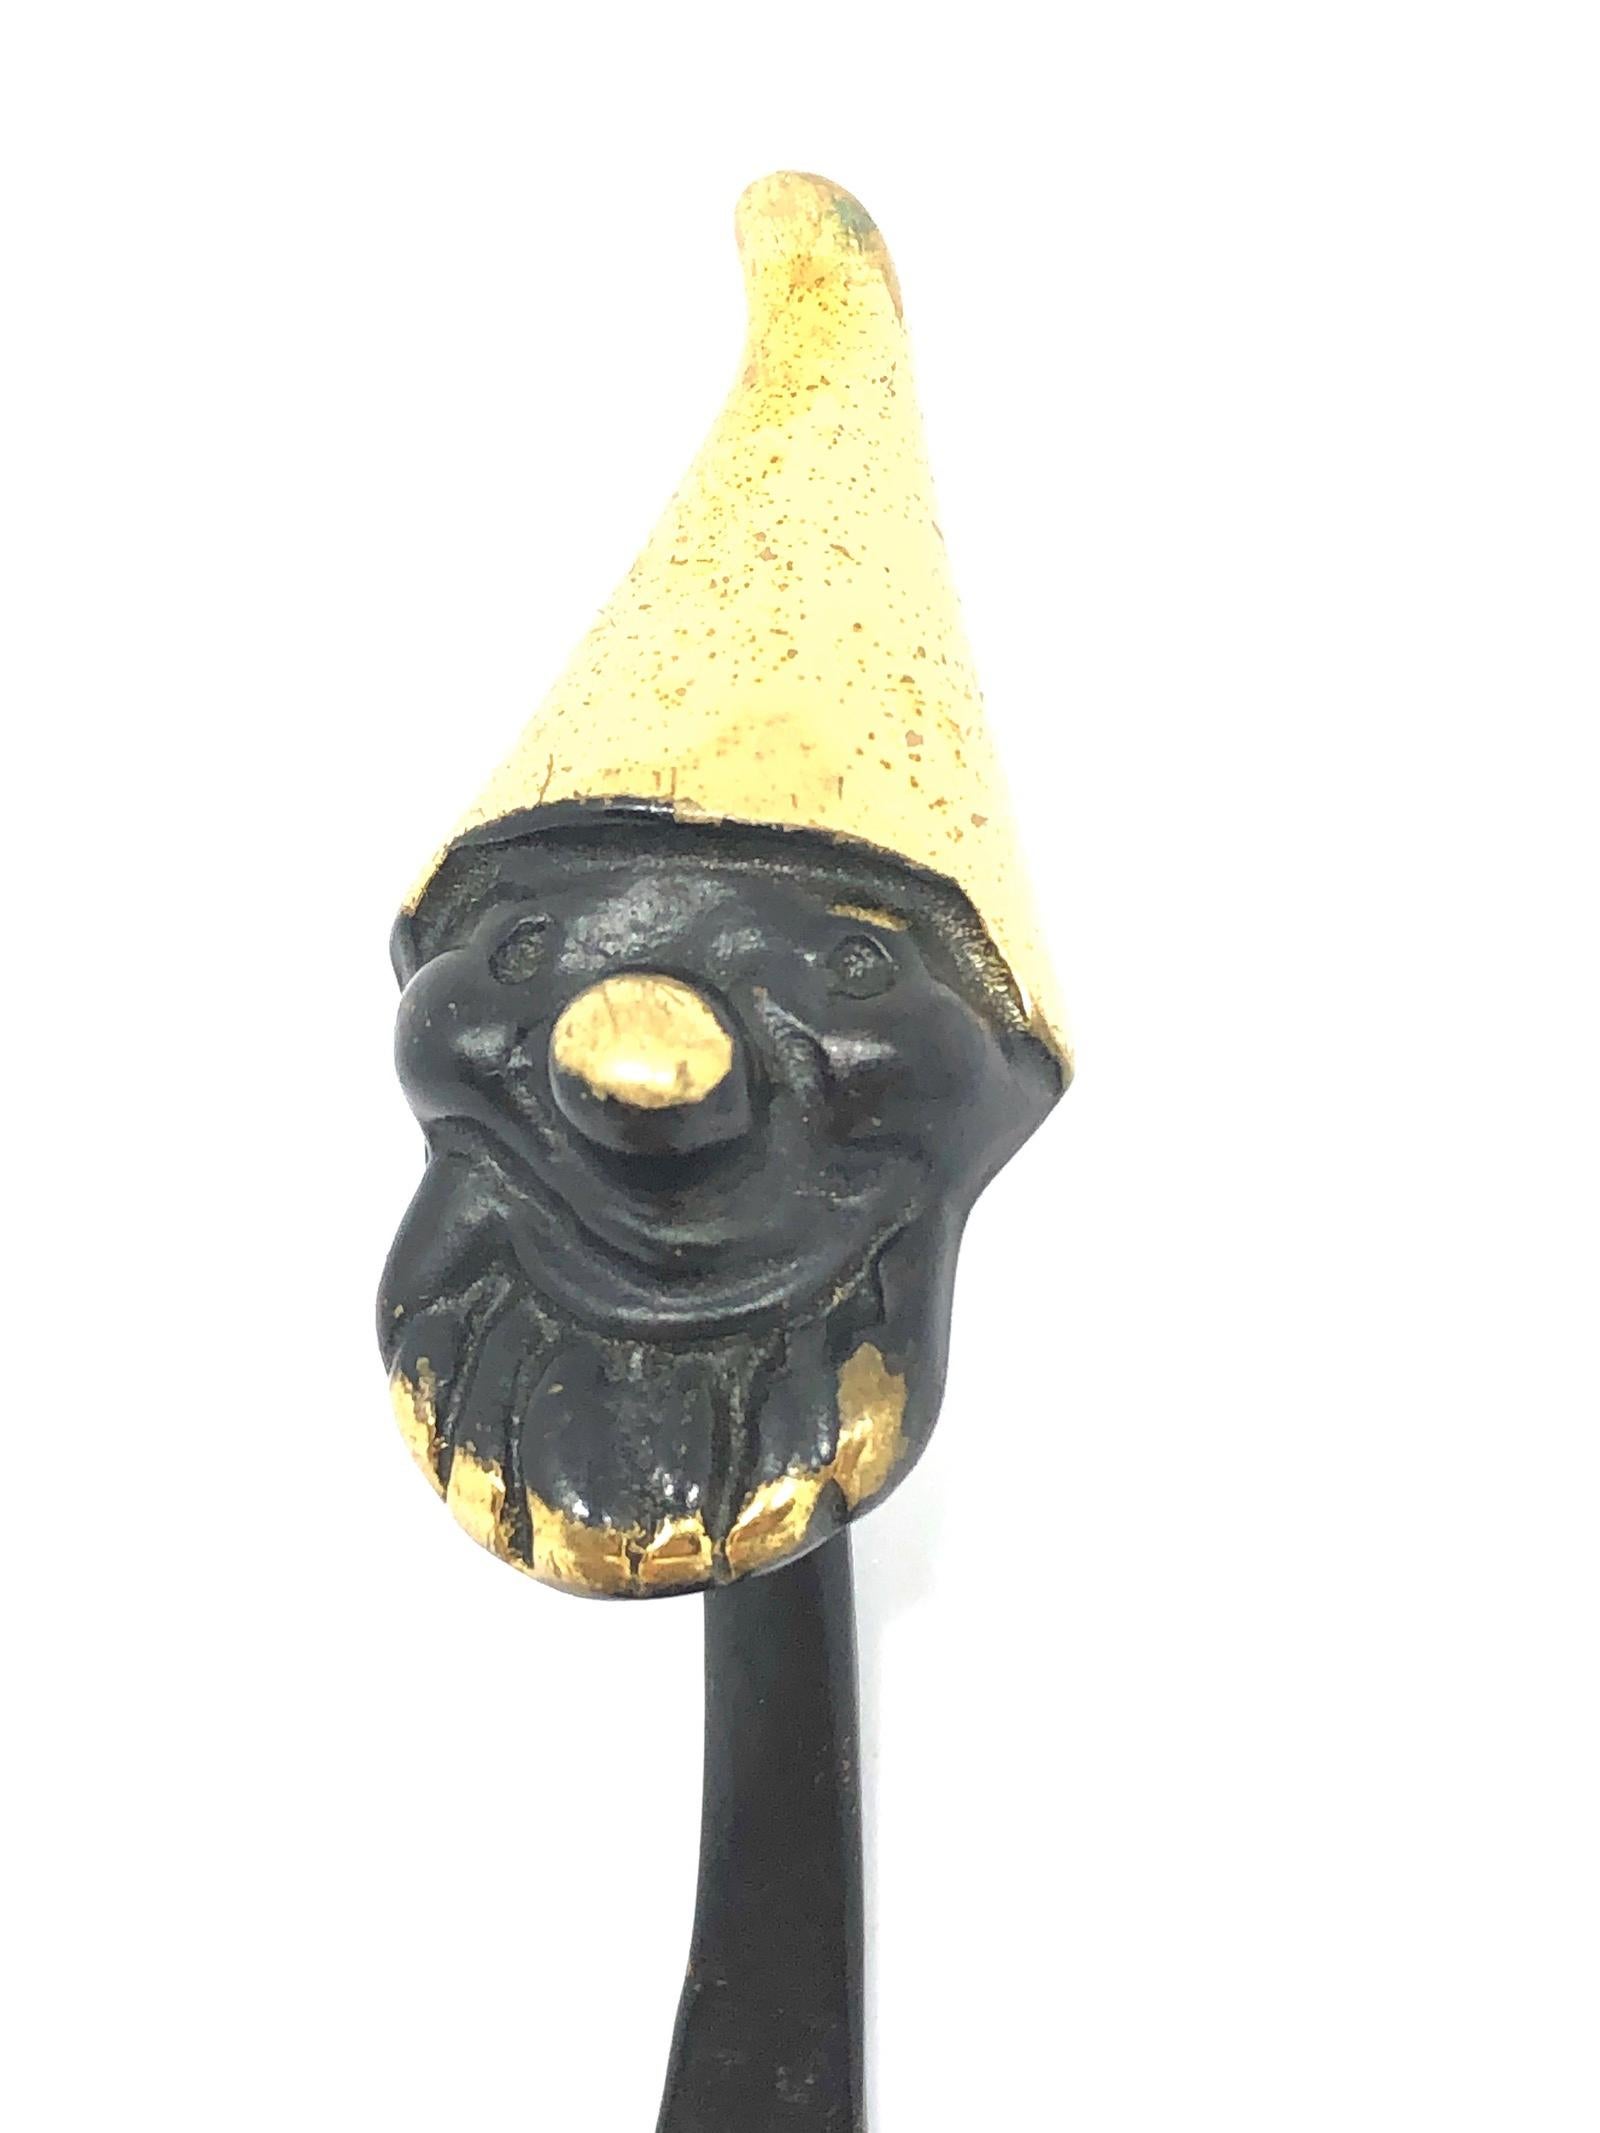 A midcentury brass wall coat hook, displaying a dwarf. A humorous design by Walter Bosse, executed by Hertha Baller Austria in the 1950s. Made of black finished brass. In very good condition. The hook has a height of 7